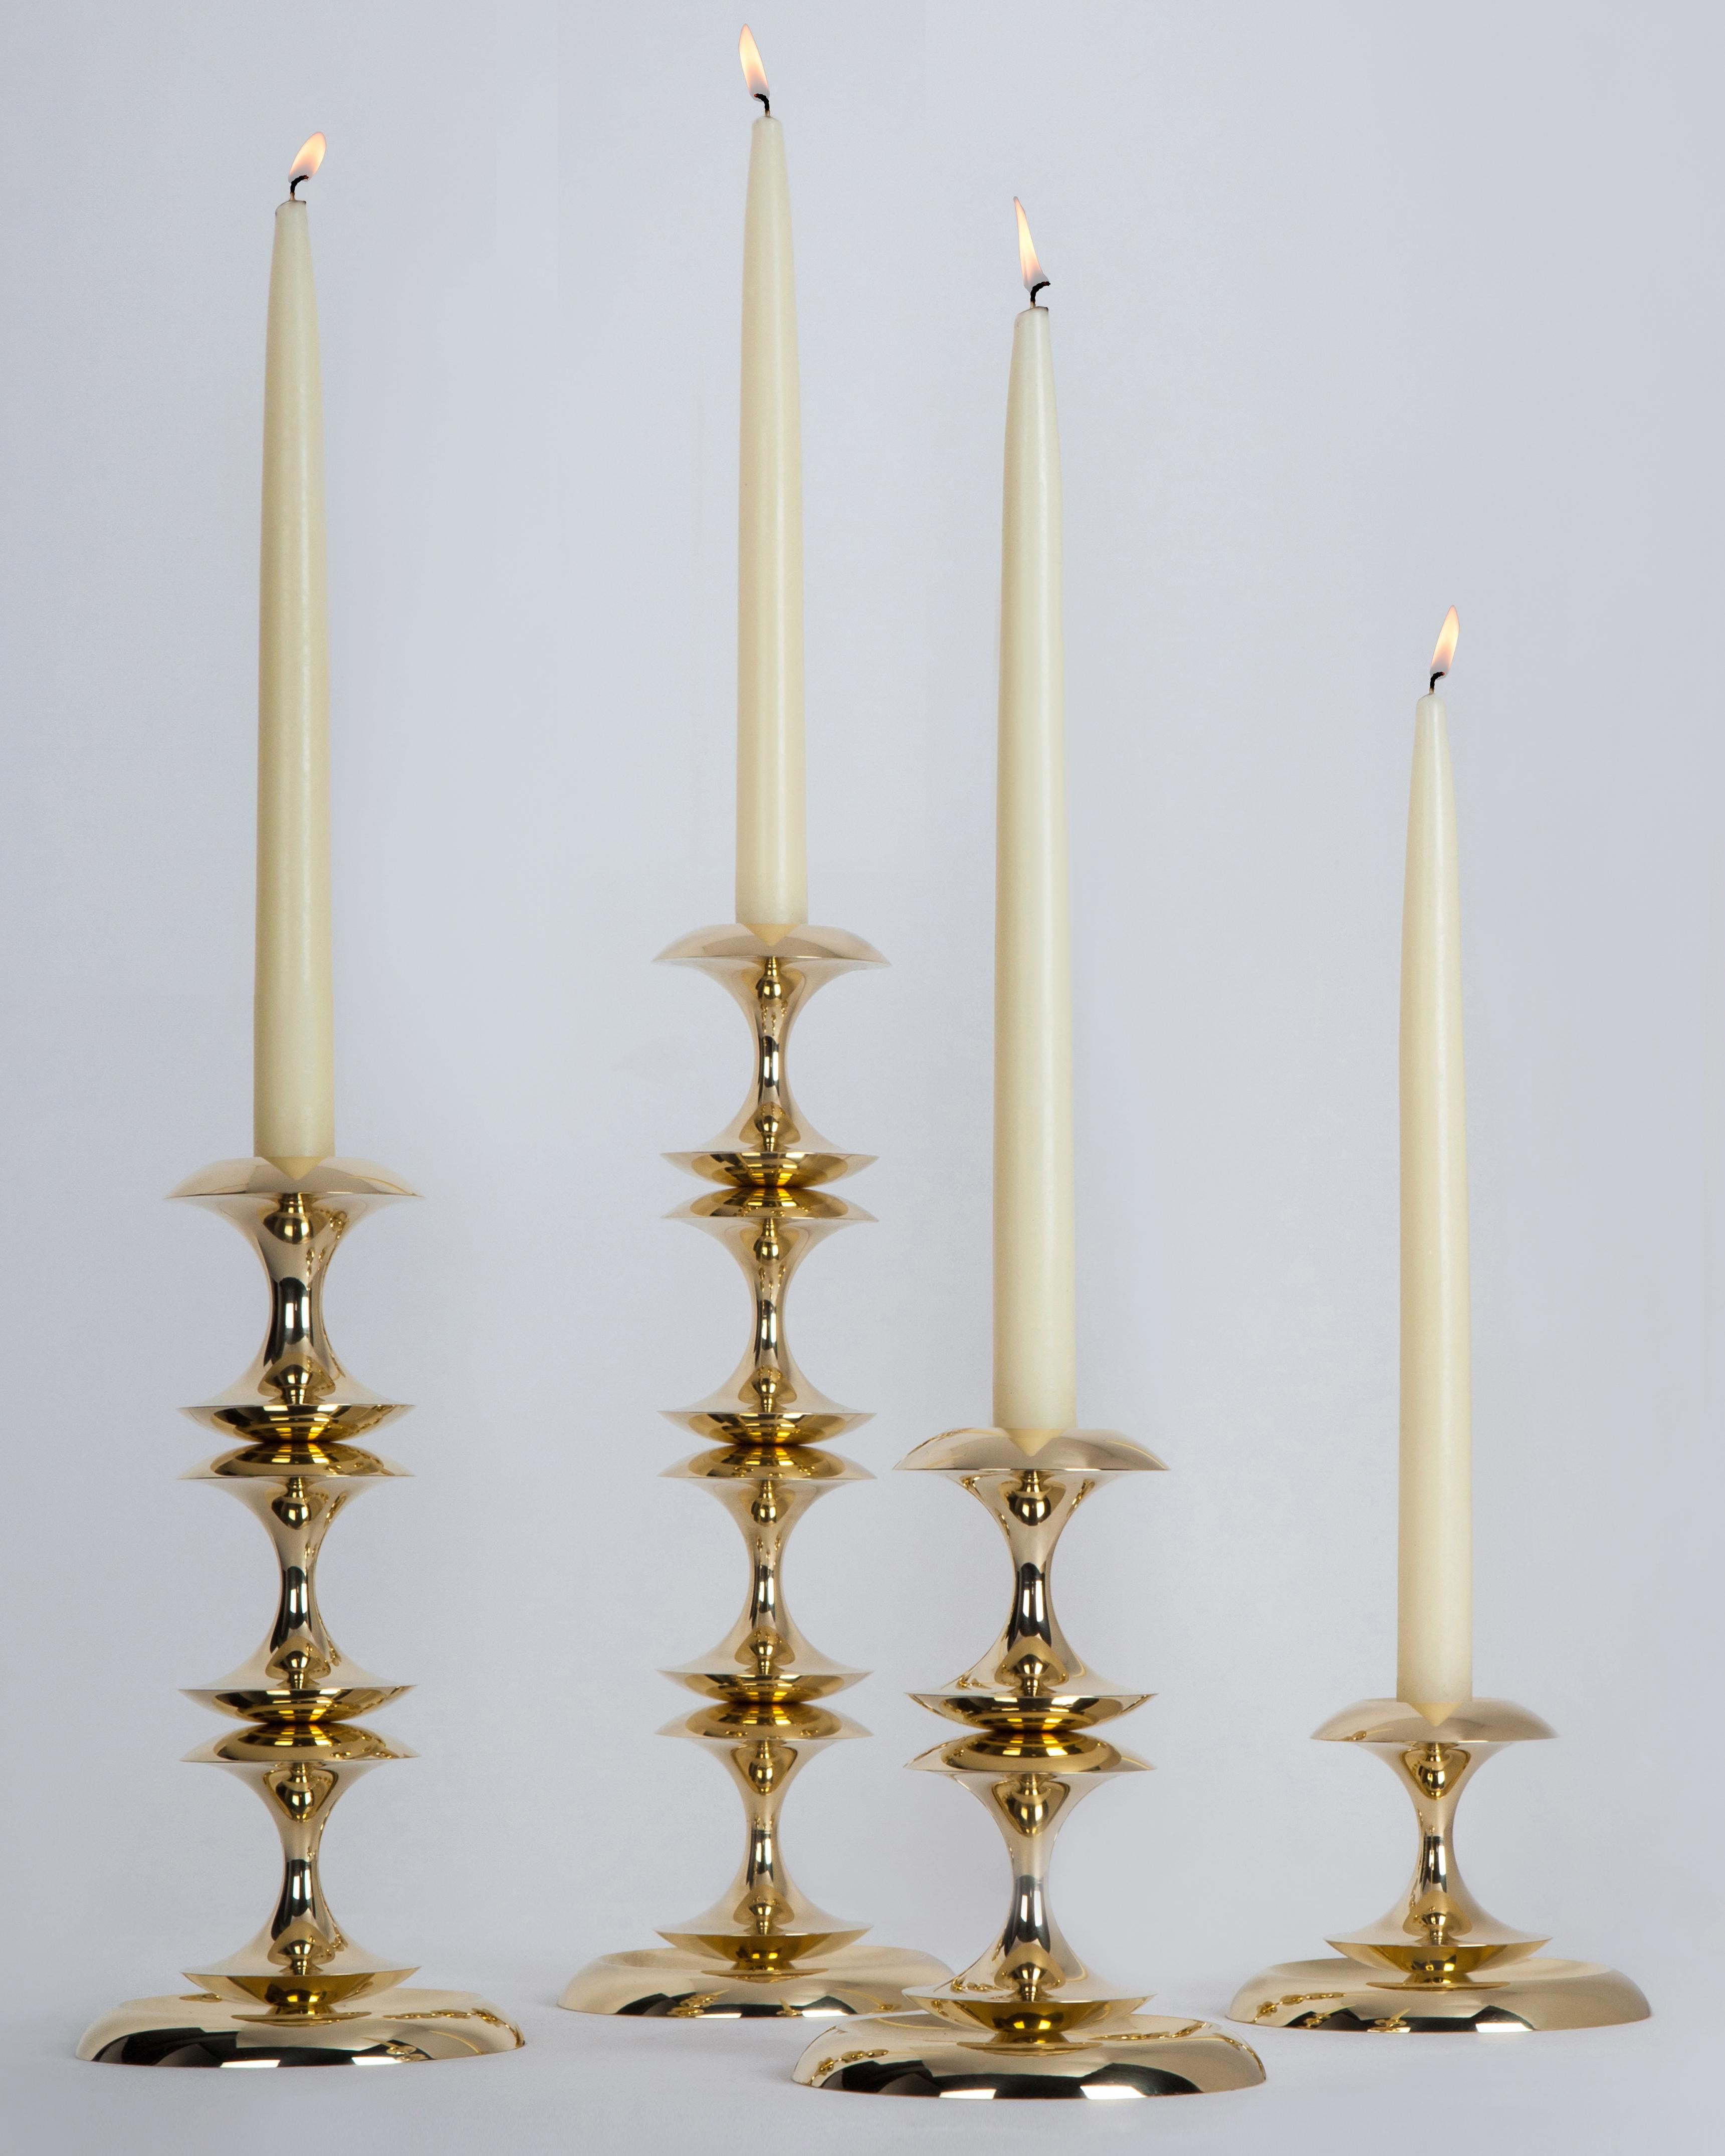 The profiles of the Stayman candlesticks are a play on the question of what is figure and what is ground, like Classic vase-or-face silhouettes. They are cut from round solid brass in four sizes; stack them up tall, use them in groups as a